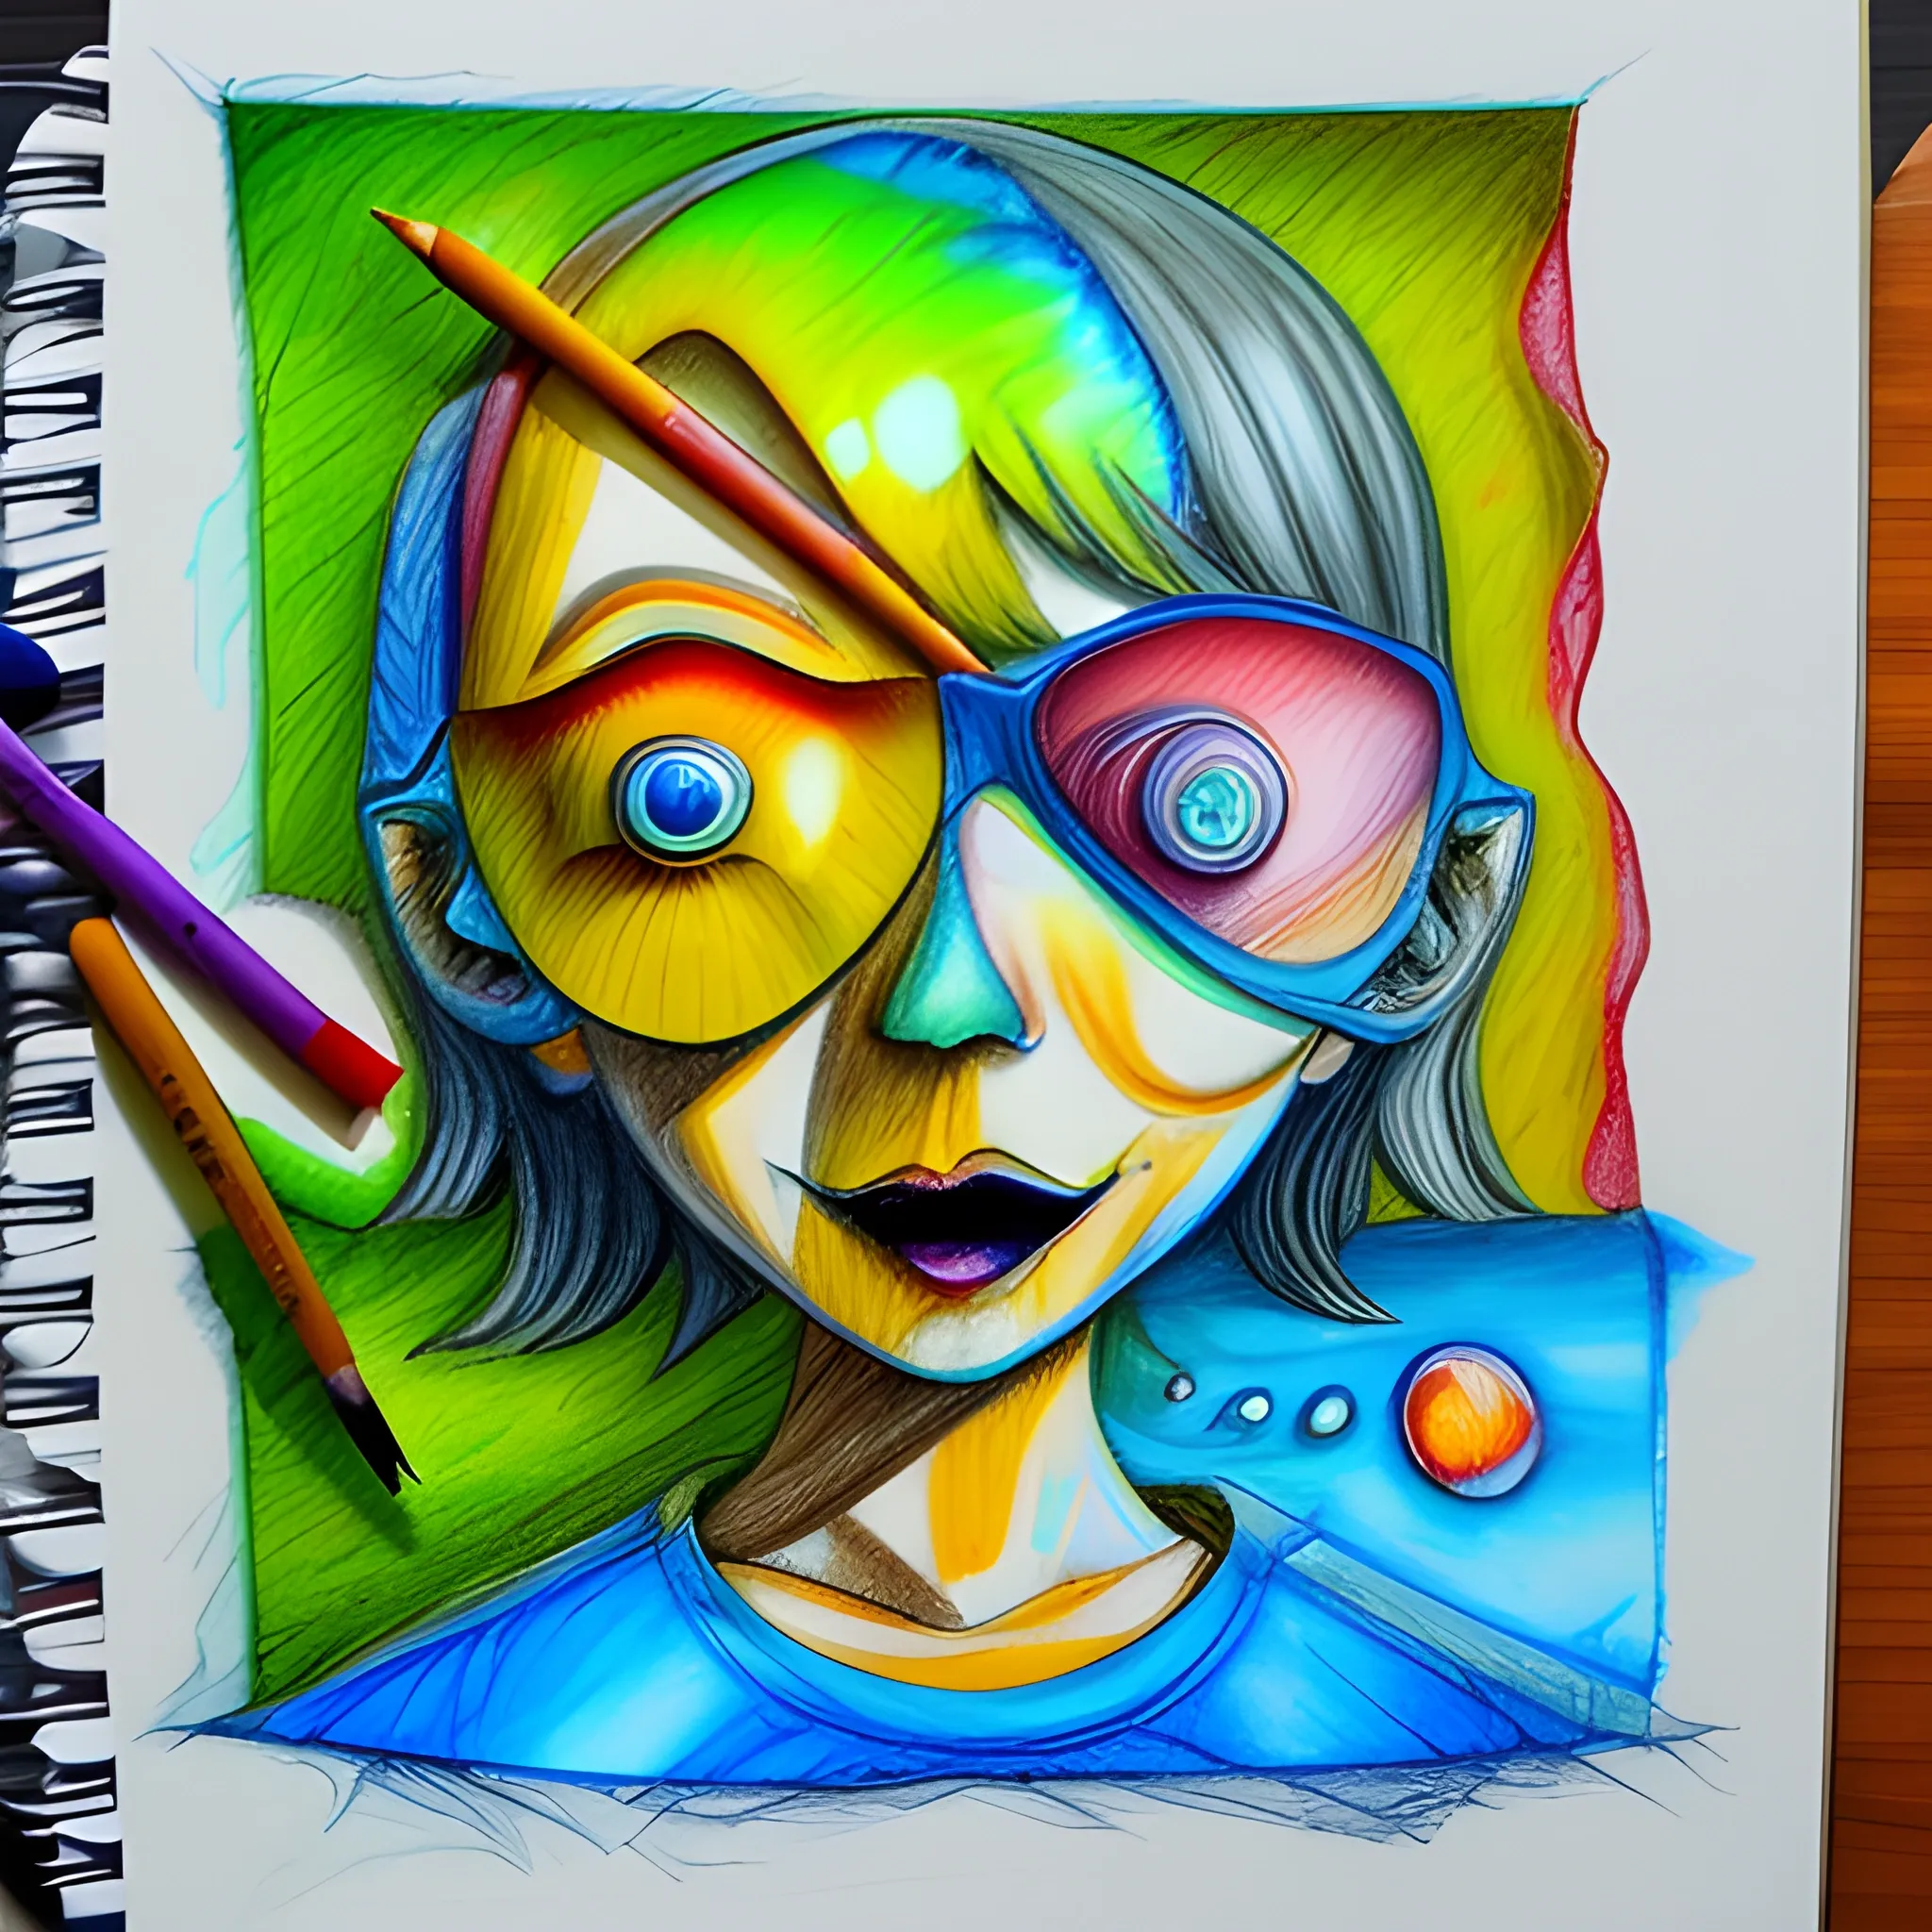 , Trippy, Cartoon, 3D, Pencil Sketch, Water Color, Oil Painting, Trippy, Cartoon, 3D, Pencil Sketch, Water Color, Oil Painting